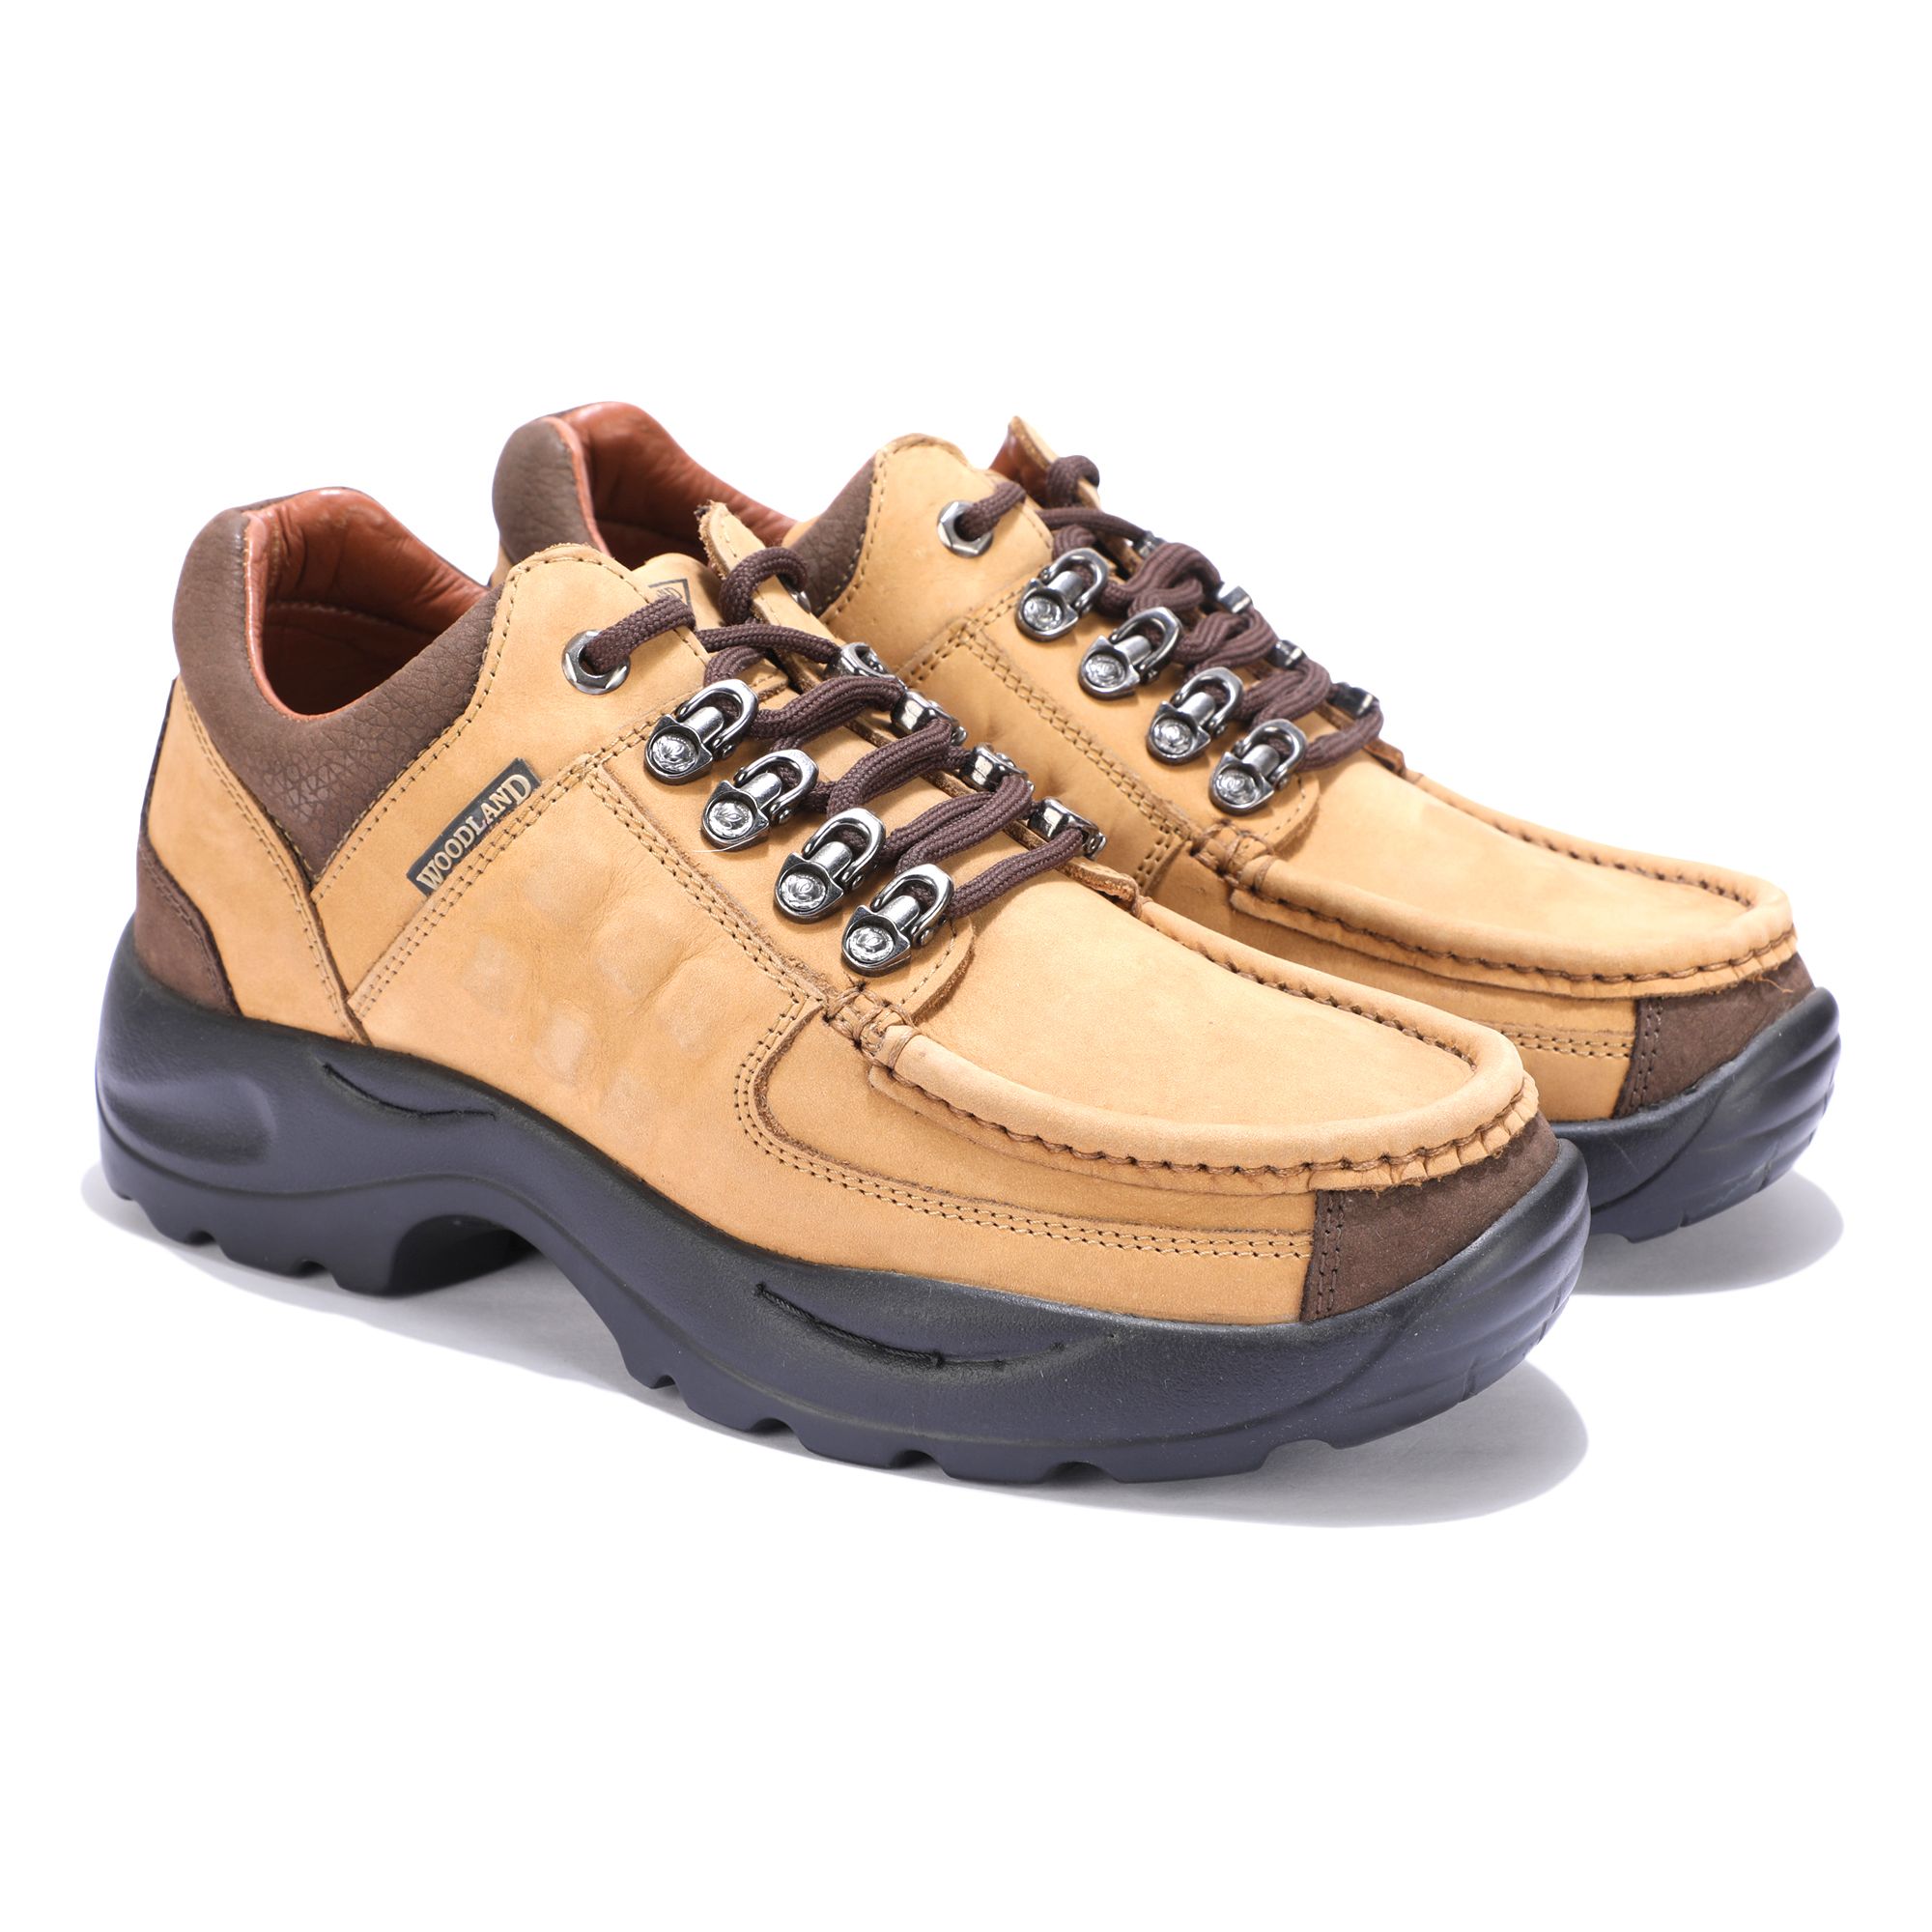 Woodland CAMEL outdoor shoes